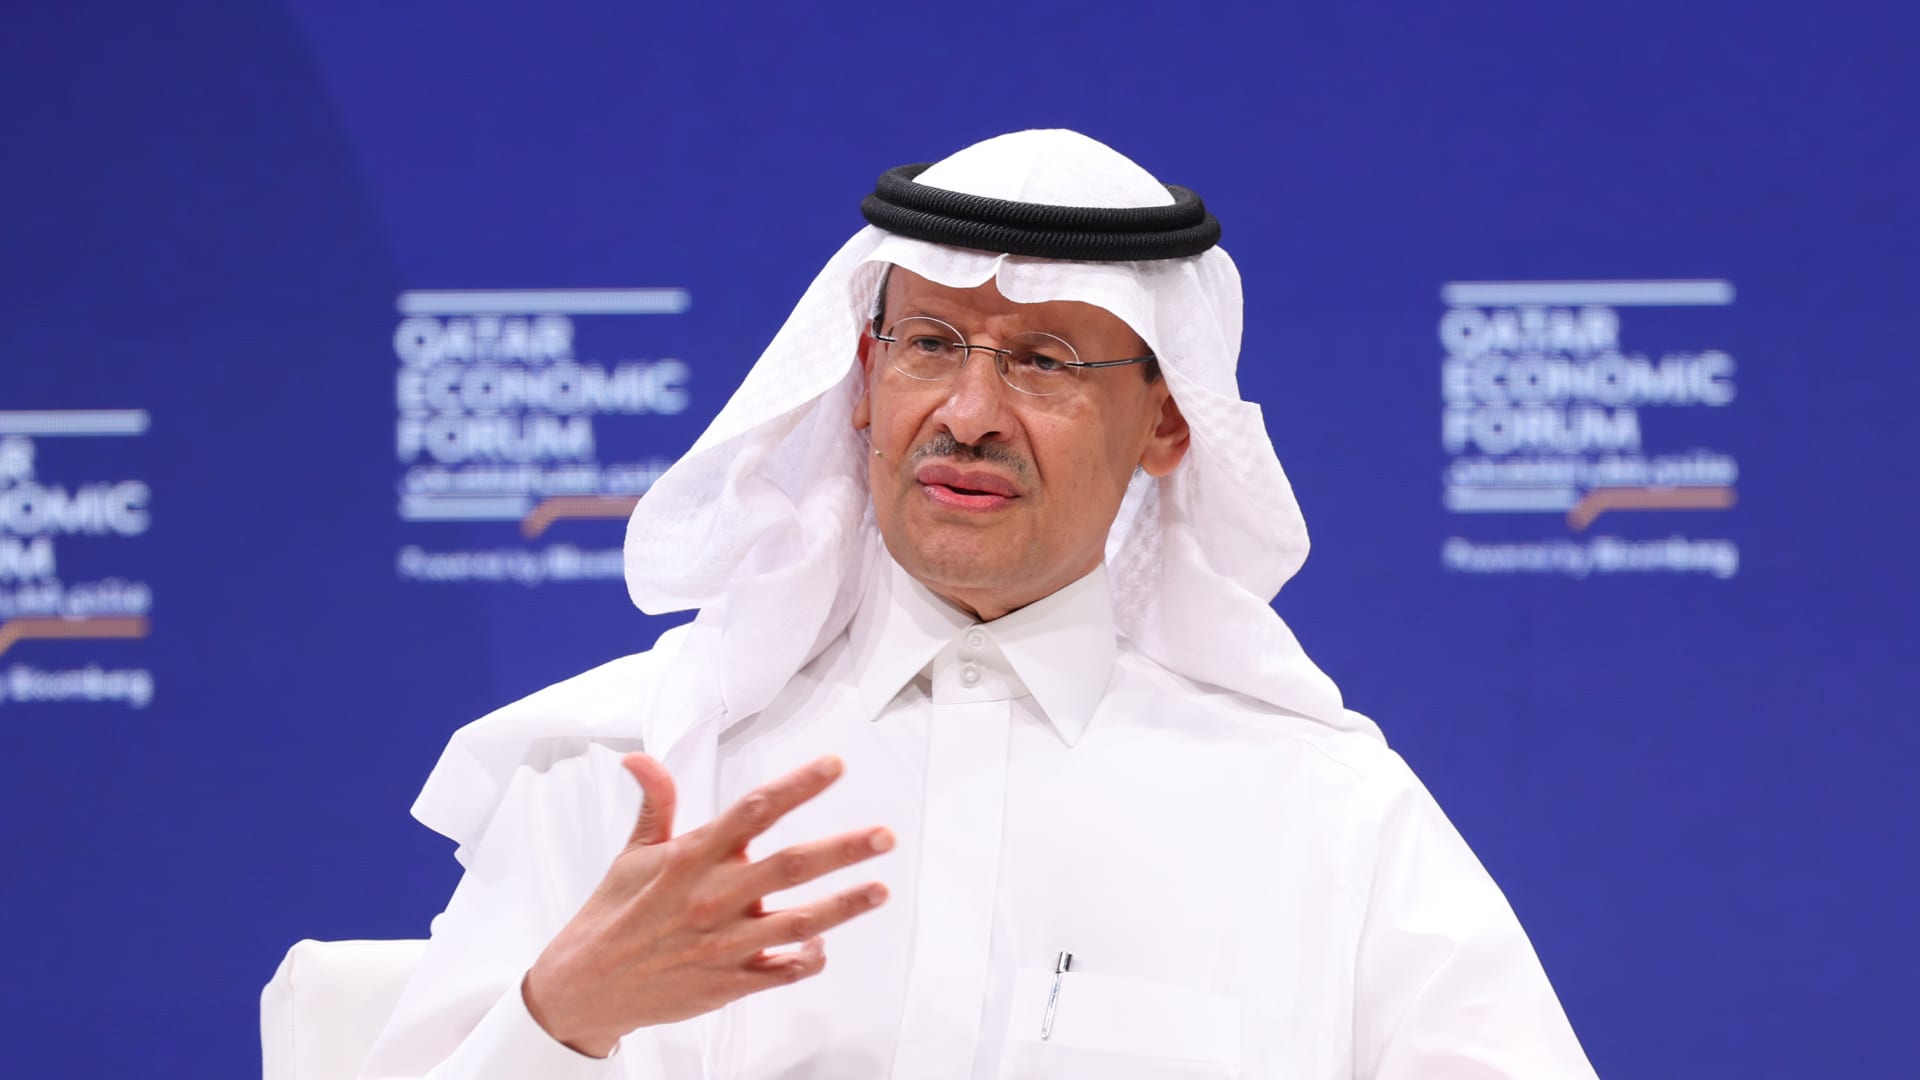 Photo of Saudi oil minister warns market speculators to ‘watch out’ ahead of OPEC+ meeting